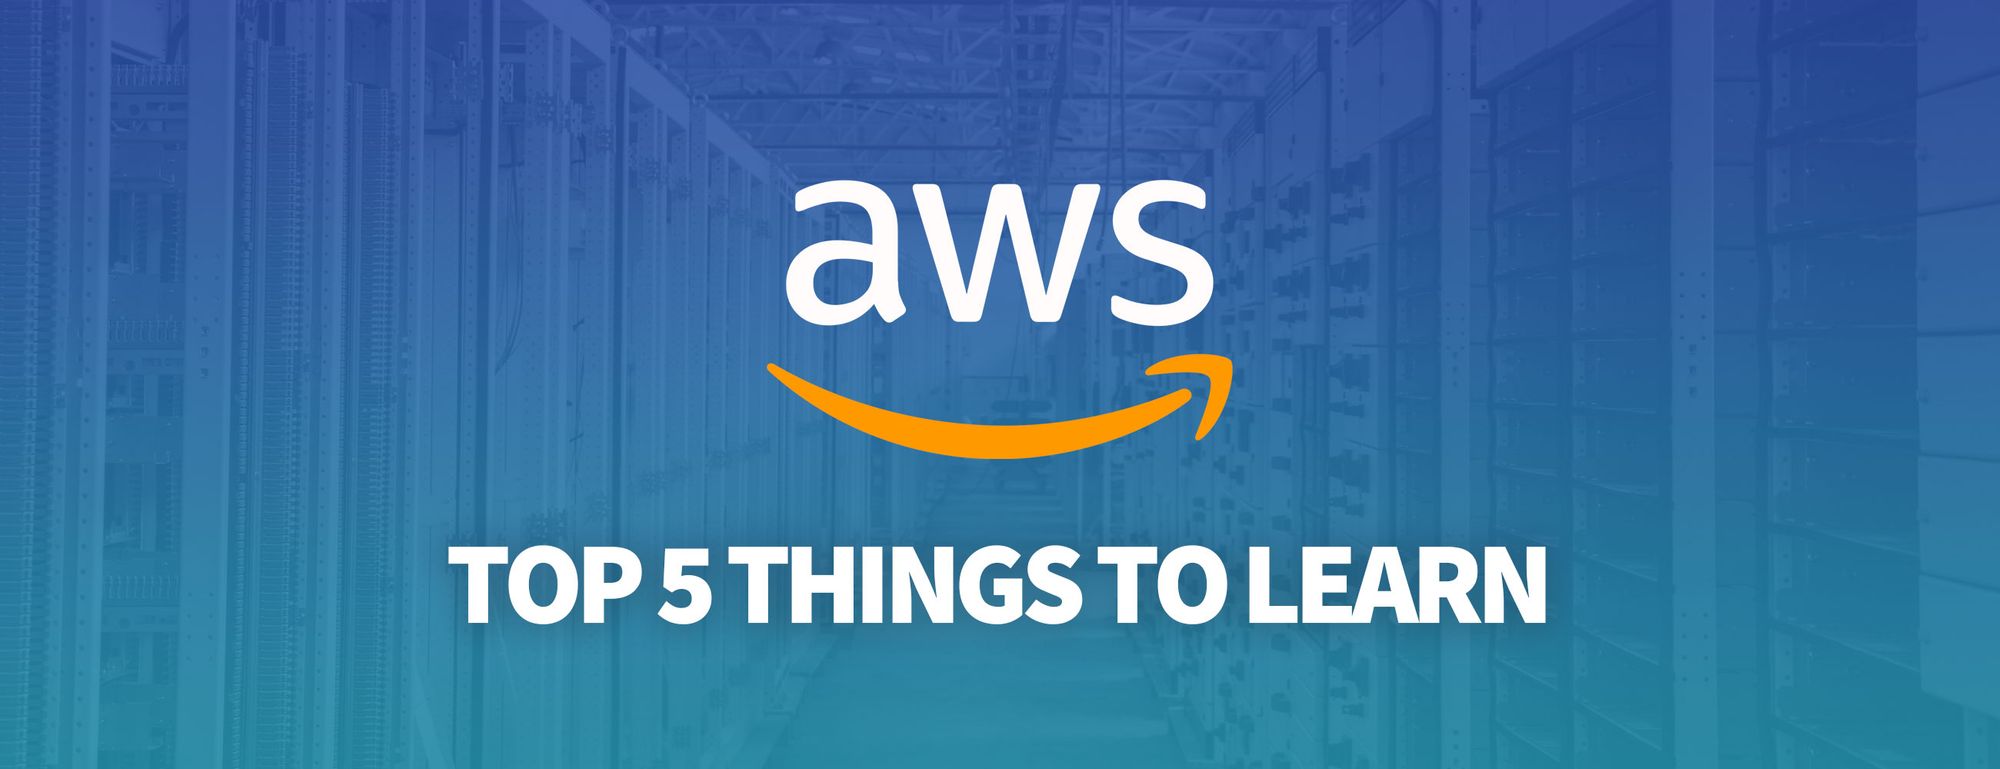 AWS Cheatsheet: The Top 5 Things to Learn First When Getting Started with Amazon Web Services